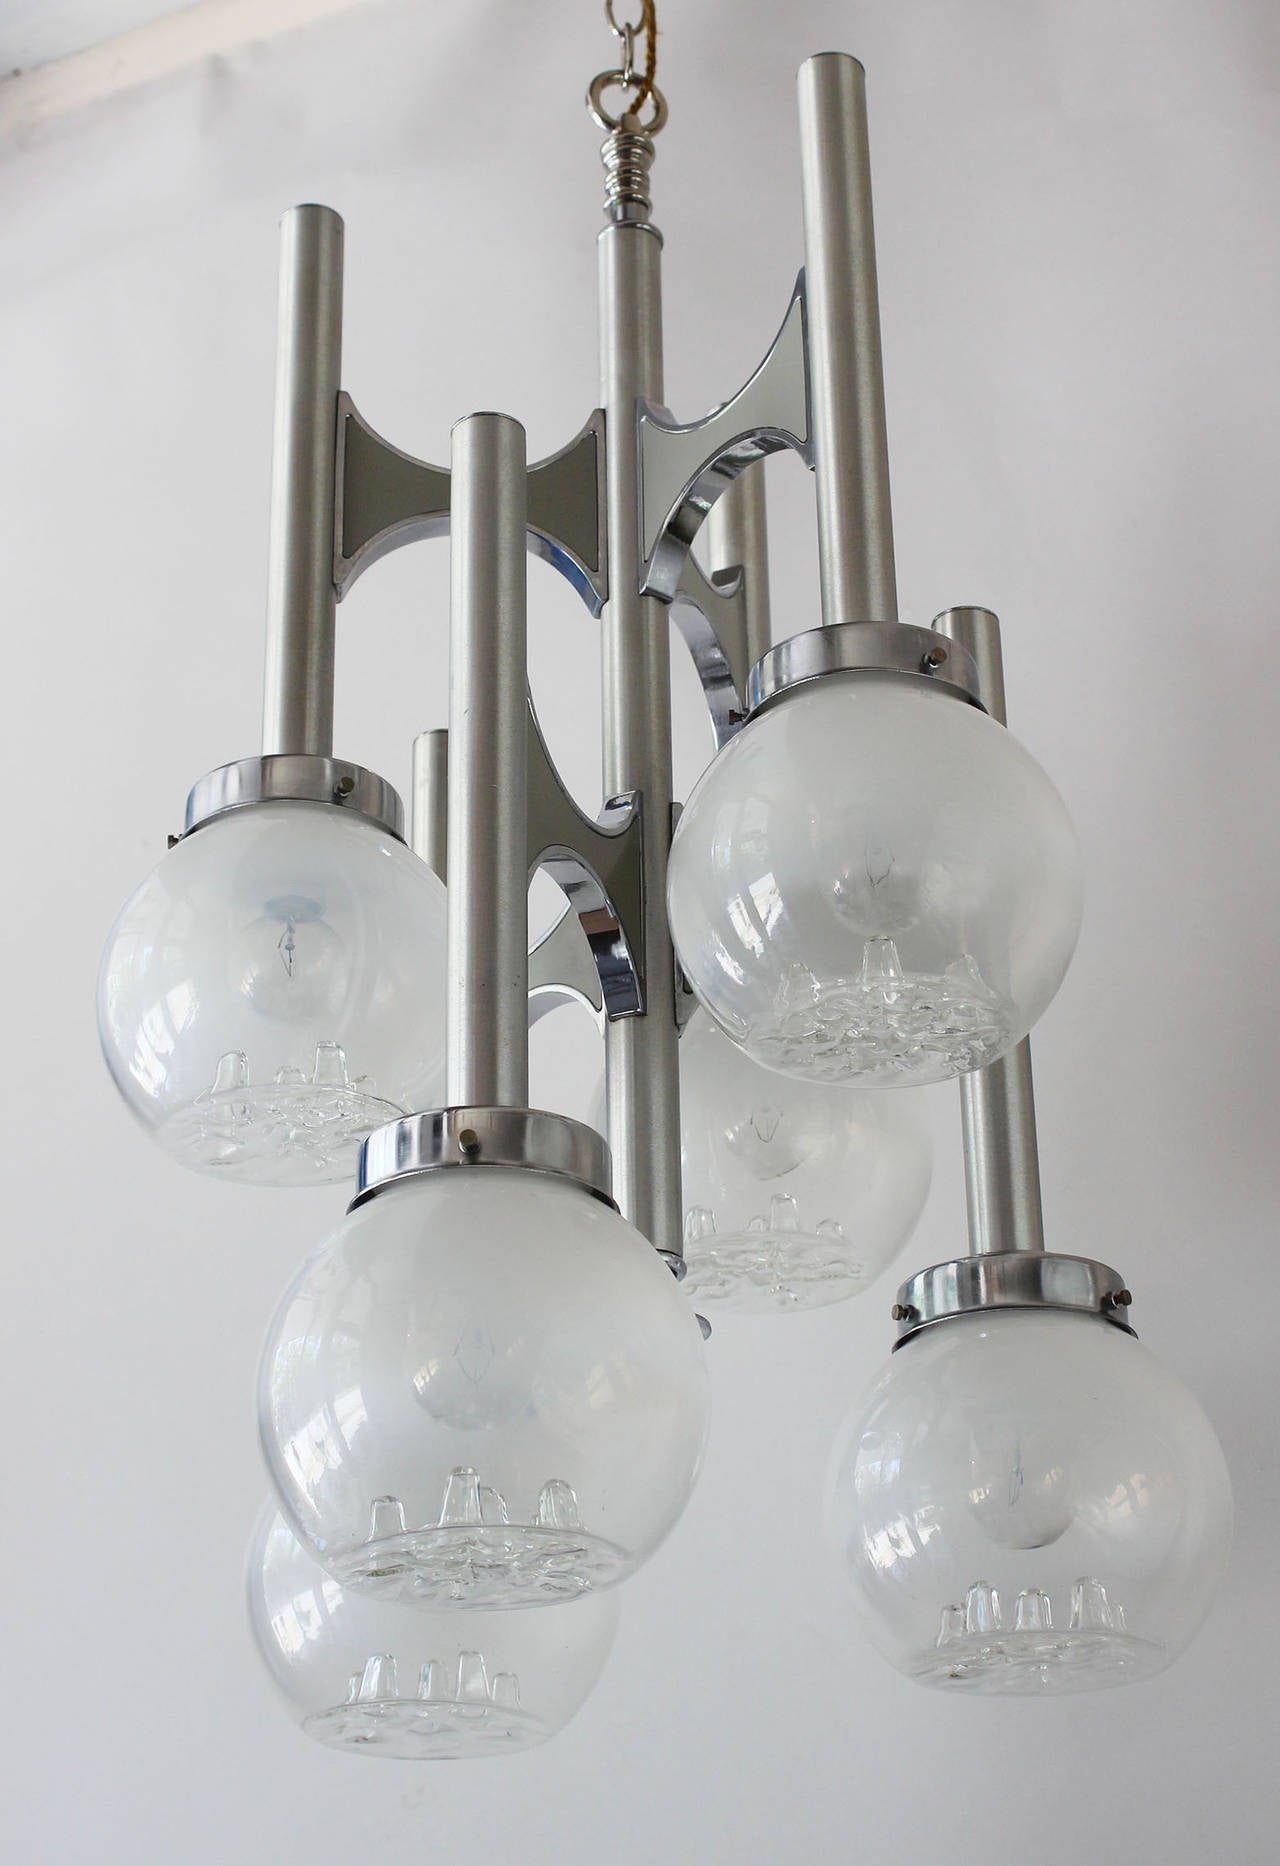 A two textured chrome chandelier with blown glass globes, designed by Gaetano Sciolari.